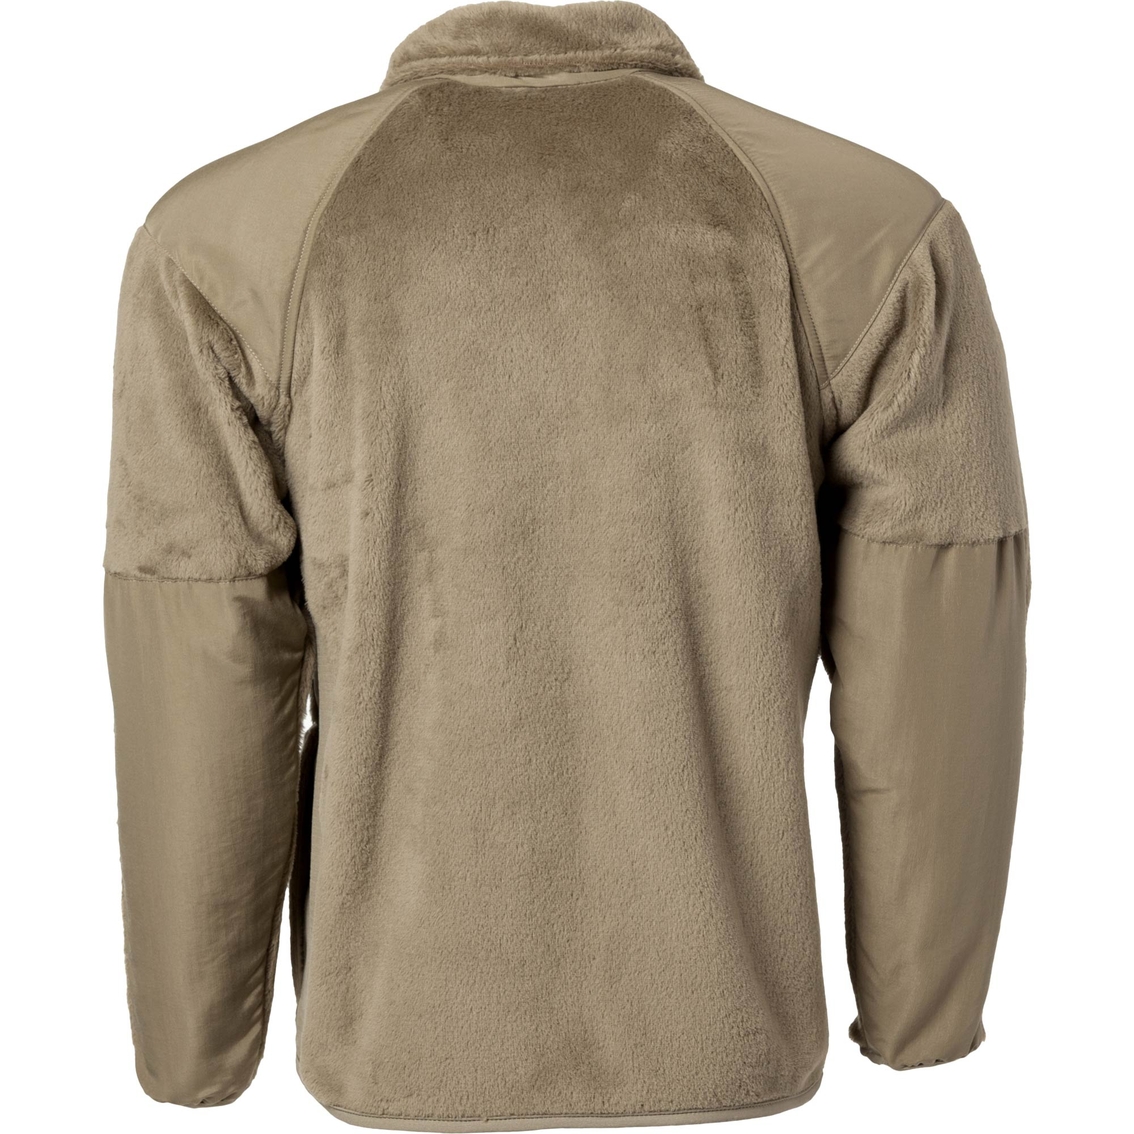 DLATS Army Cold Weather Fleece Jacket - Image 2 of 4